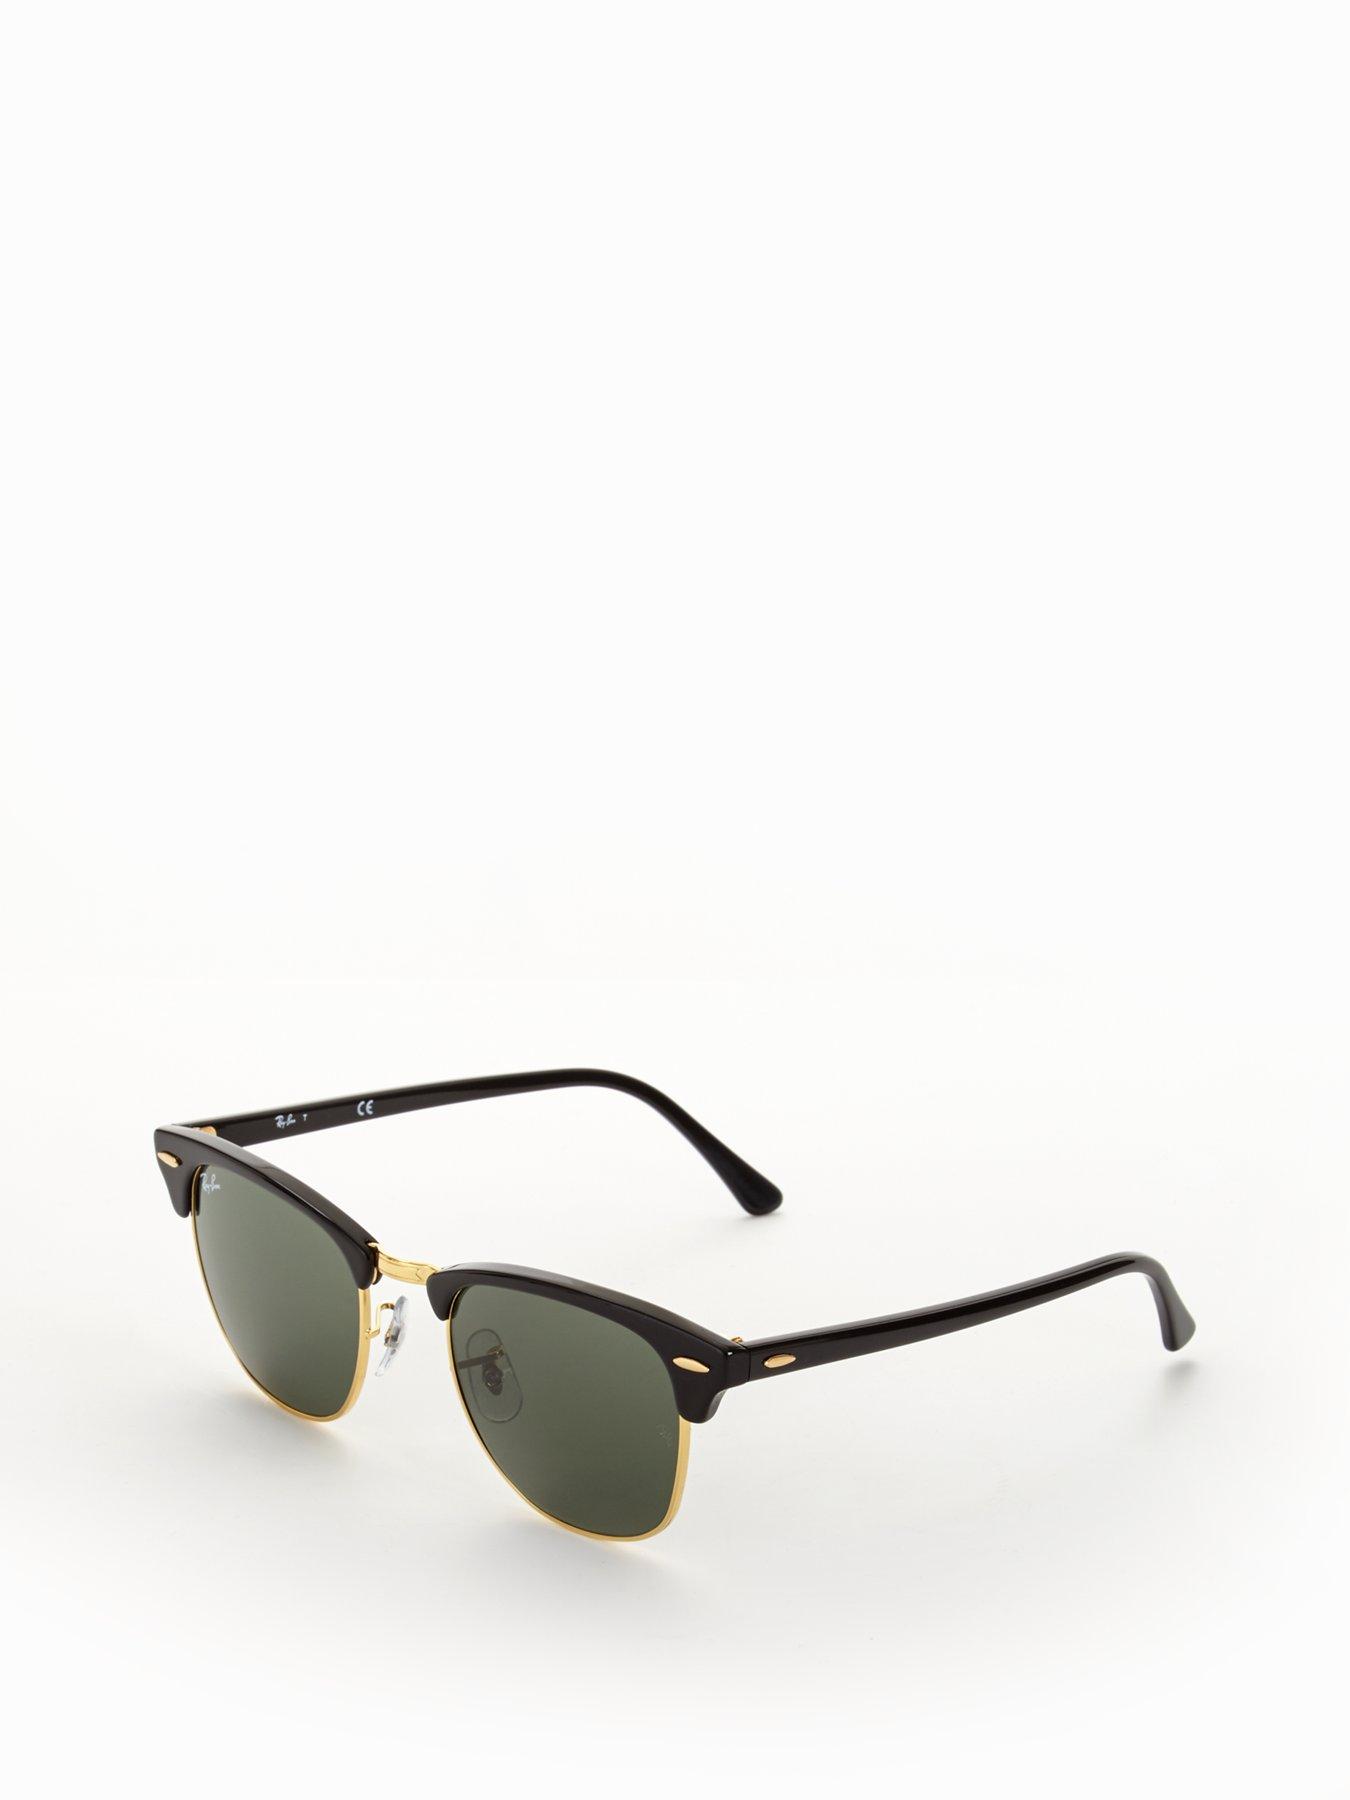 clubmaster classic ray ban